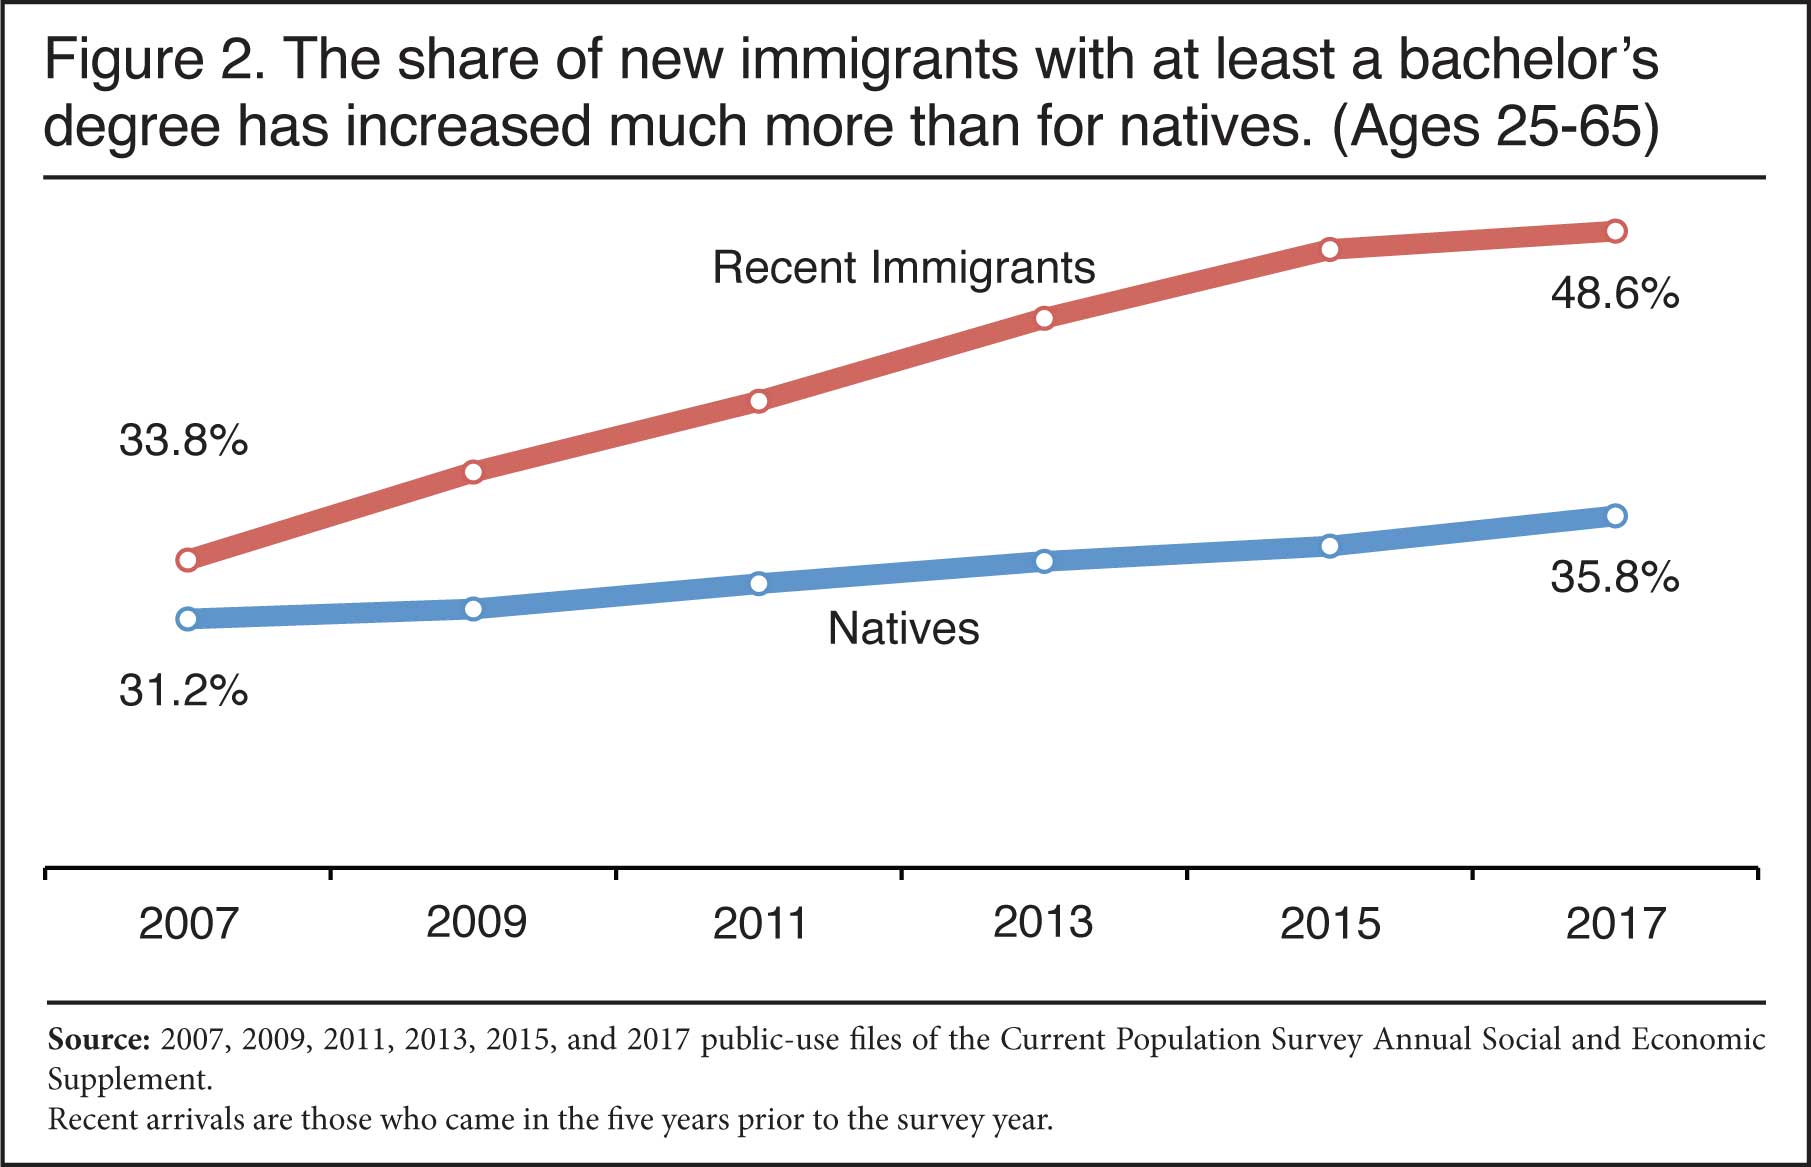 Graph: Share of new immigrants and natives with at least a bachelor's degree, 2007 to 2017